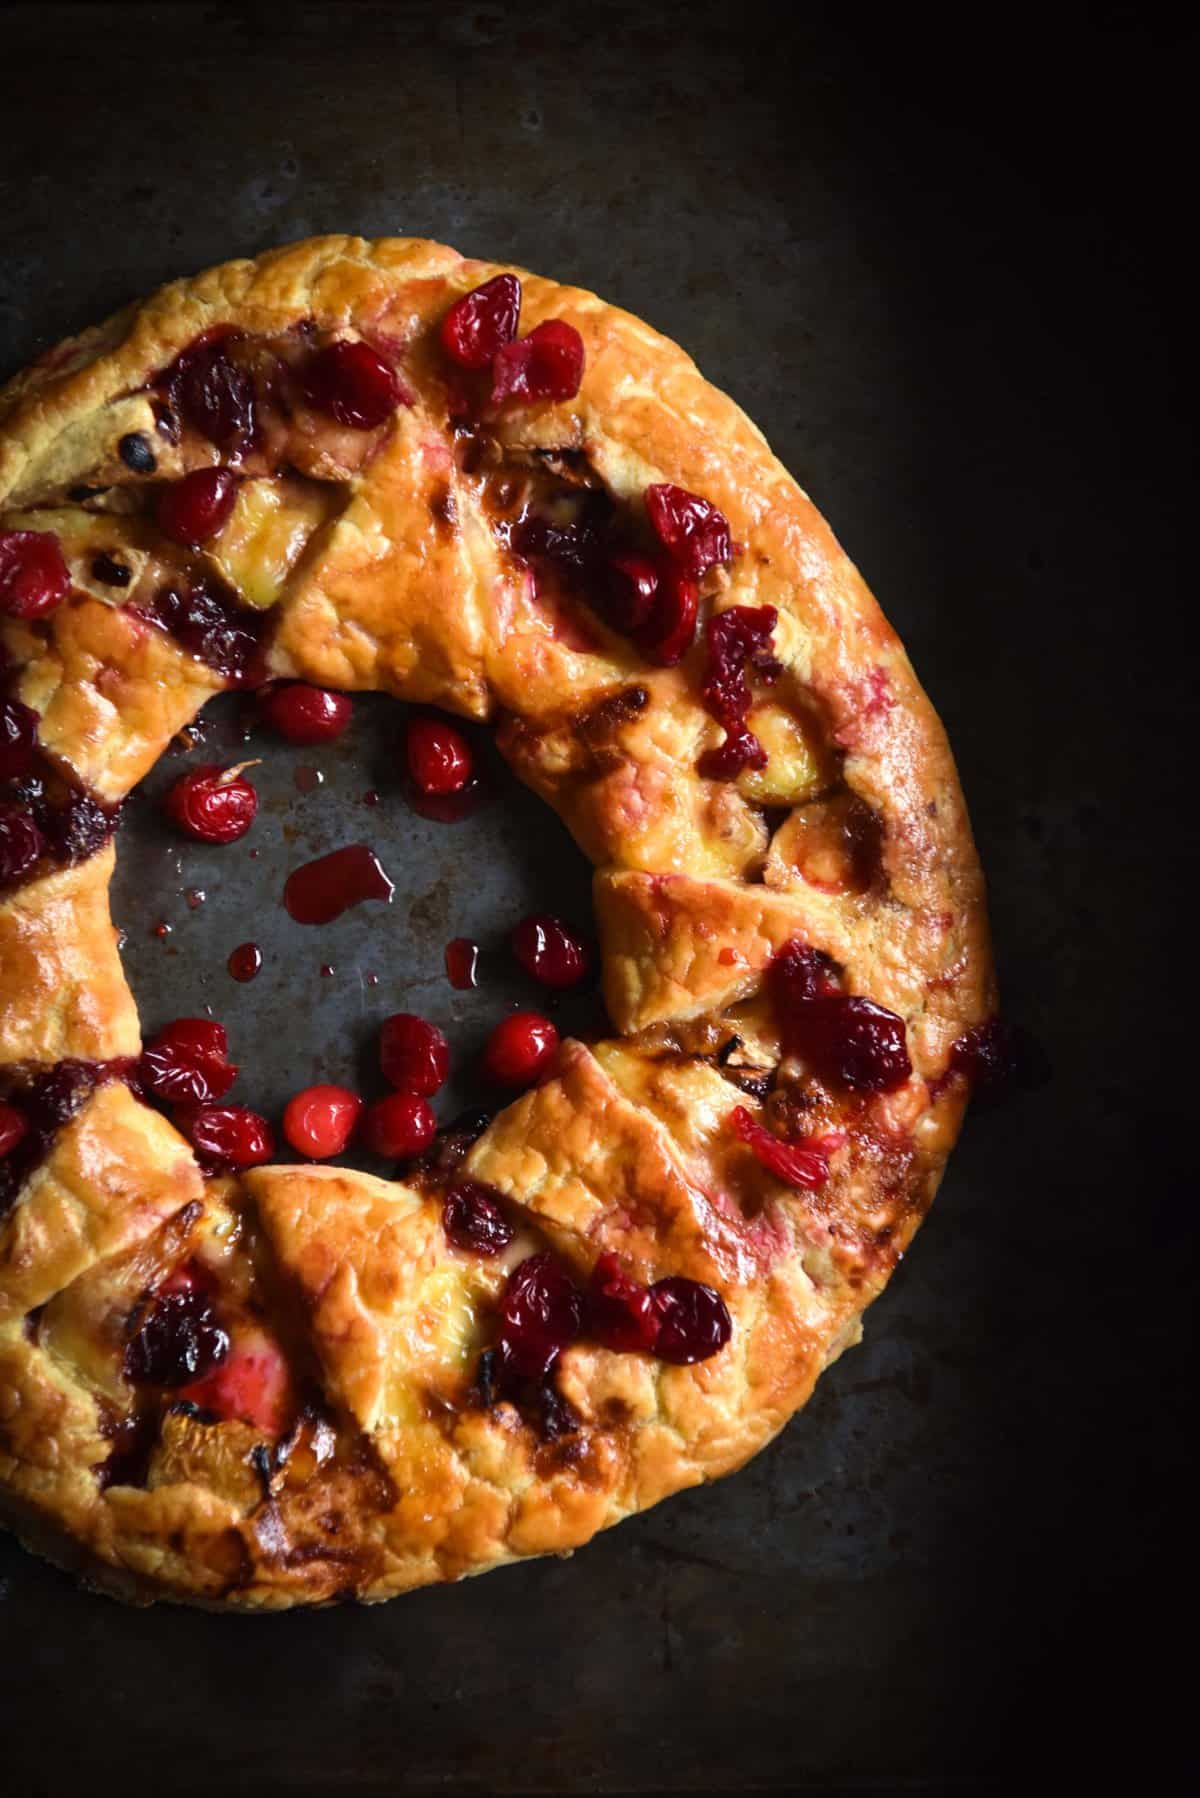 An aerial image of a gluten free brie and cranberry wreath on a dark steel backdrop.